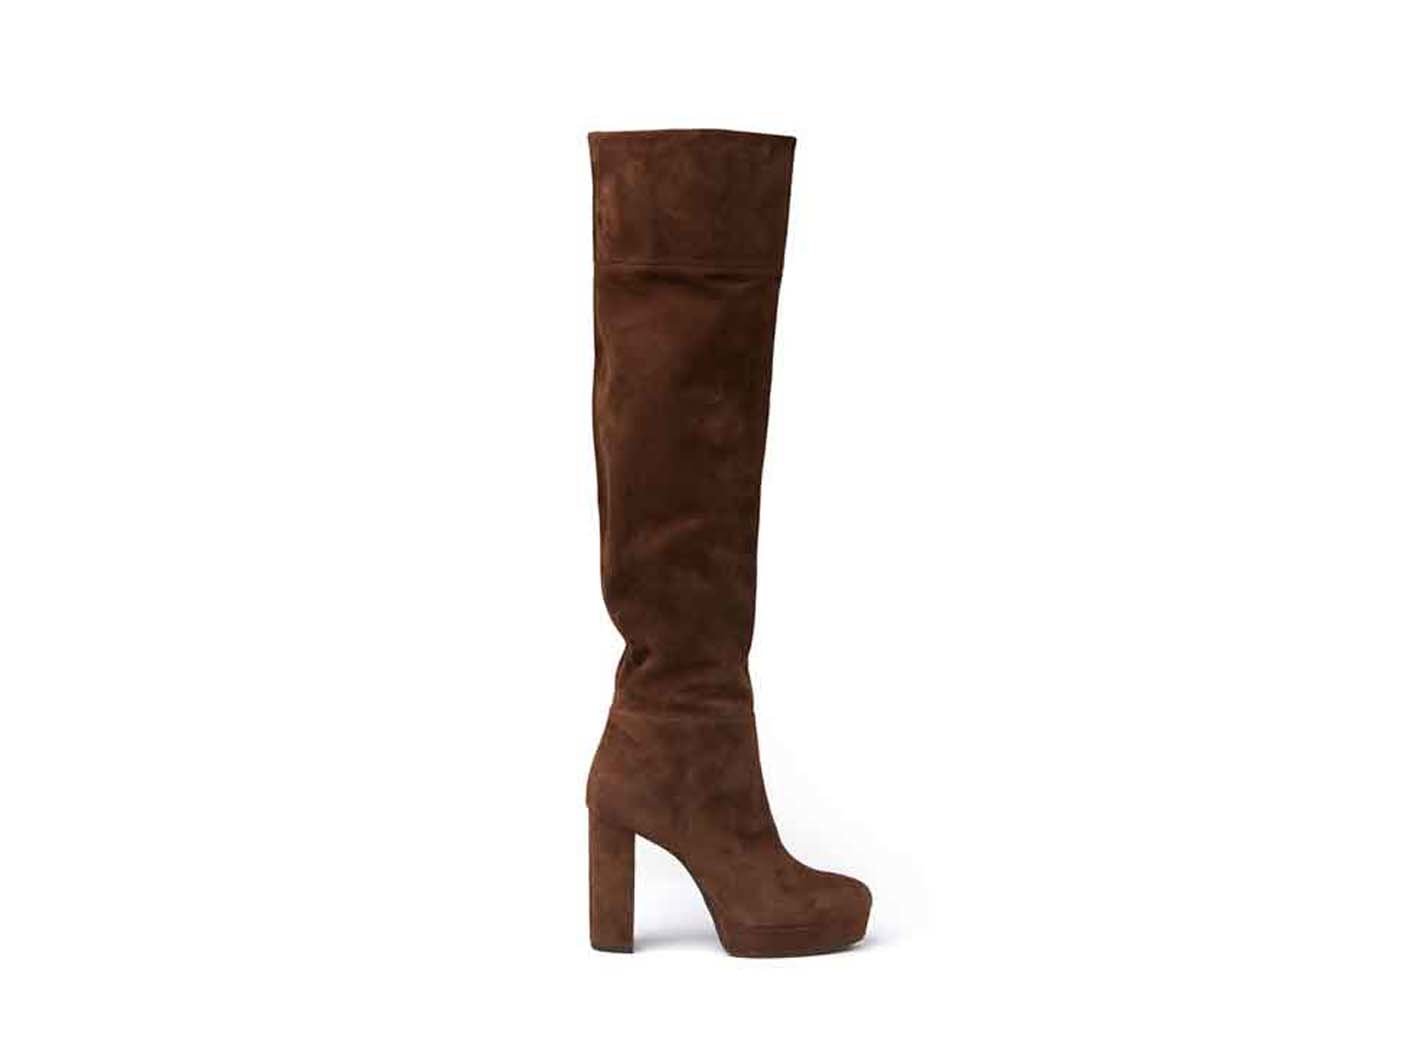 Cognac-Coloured Leather Thigh-High 